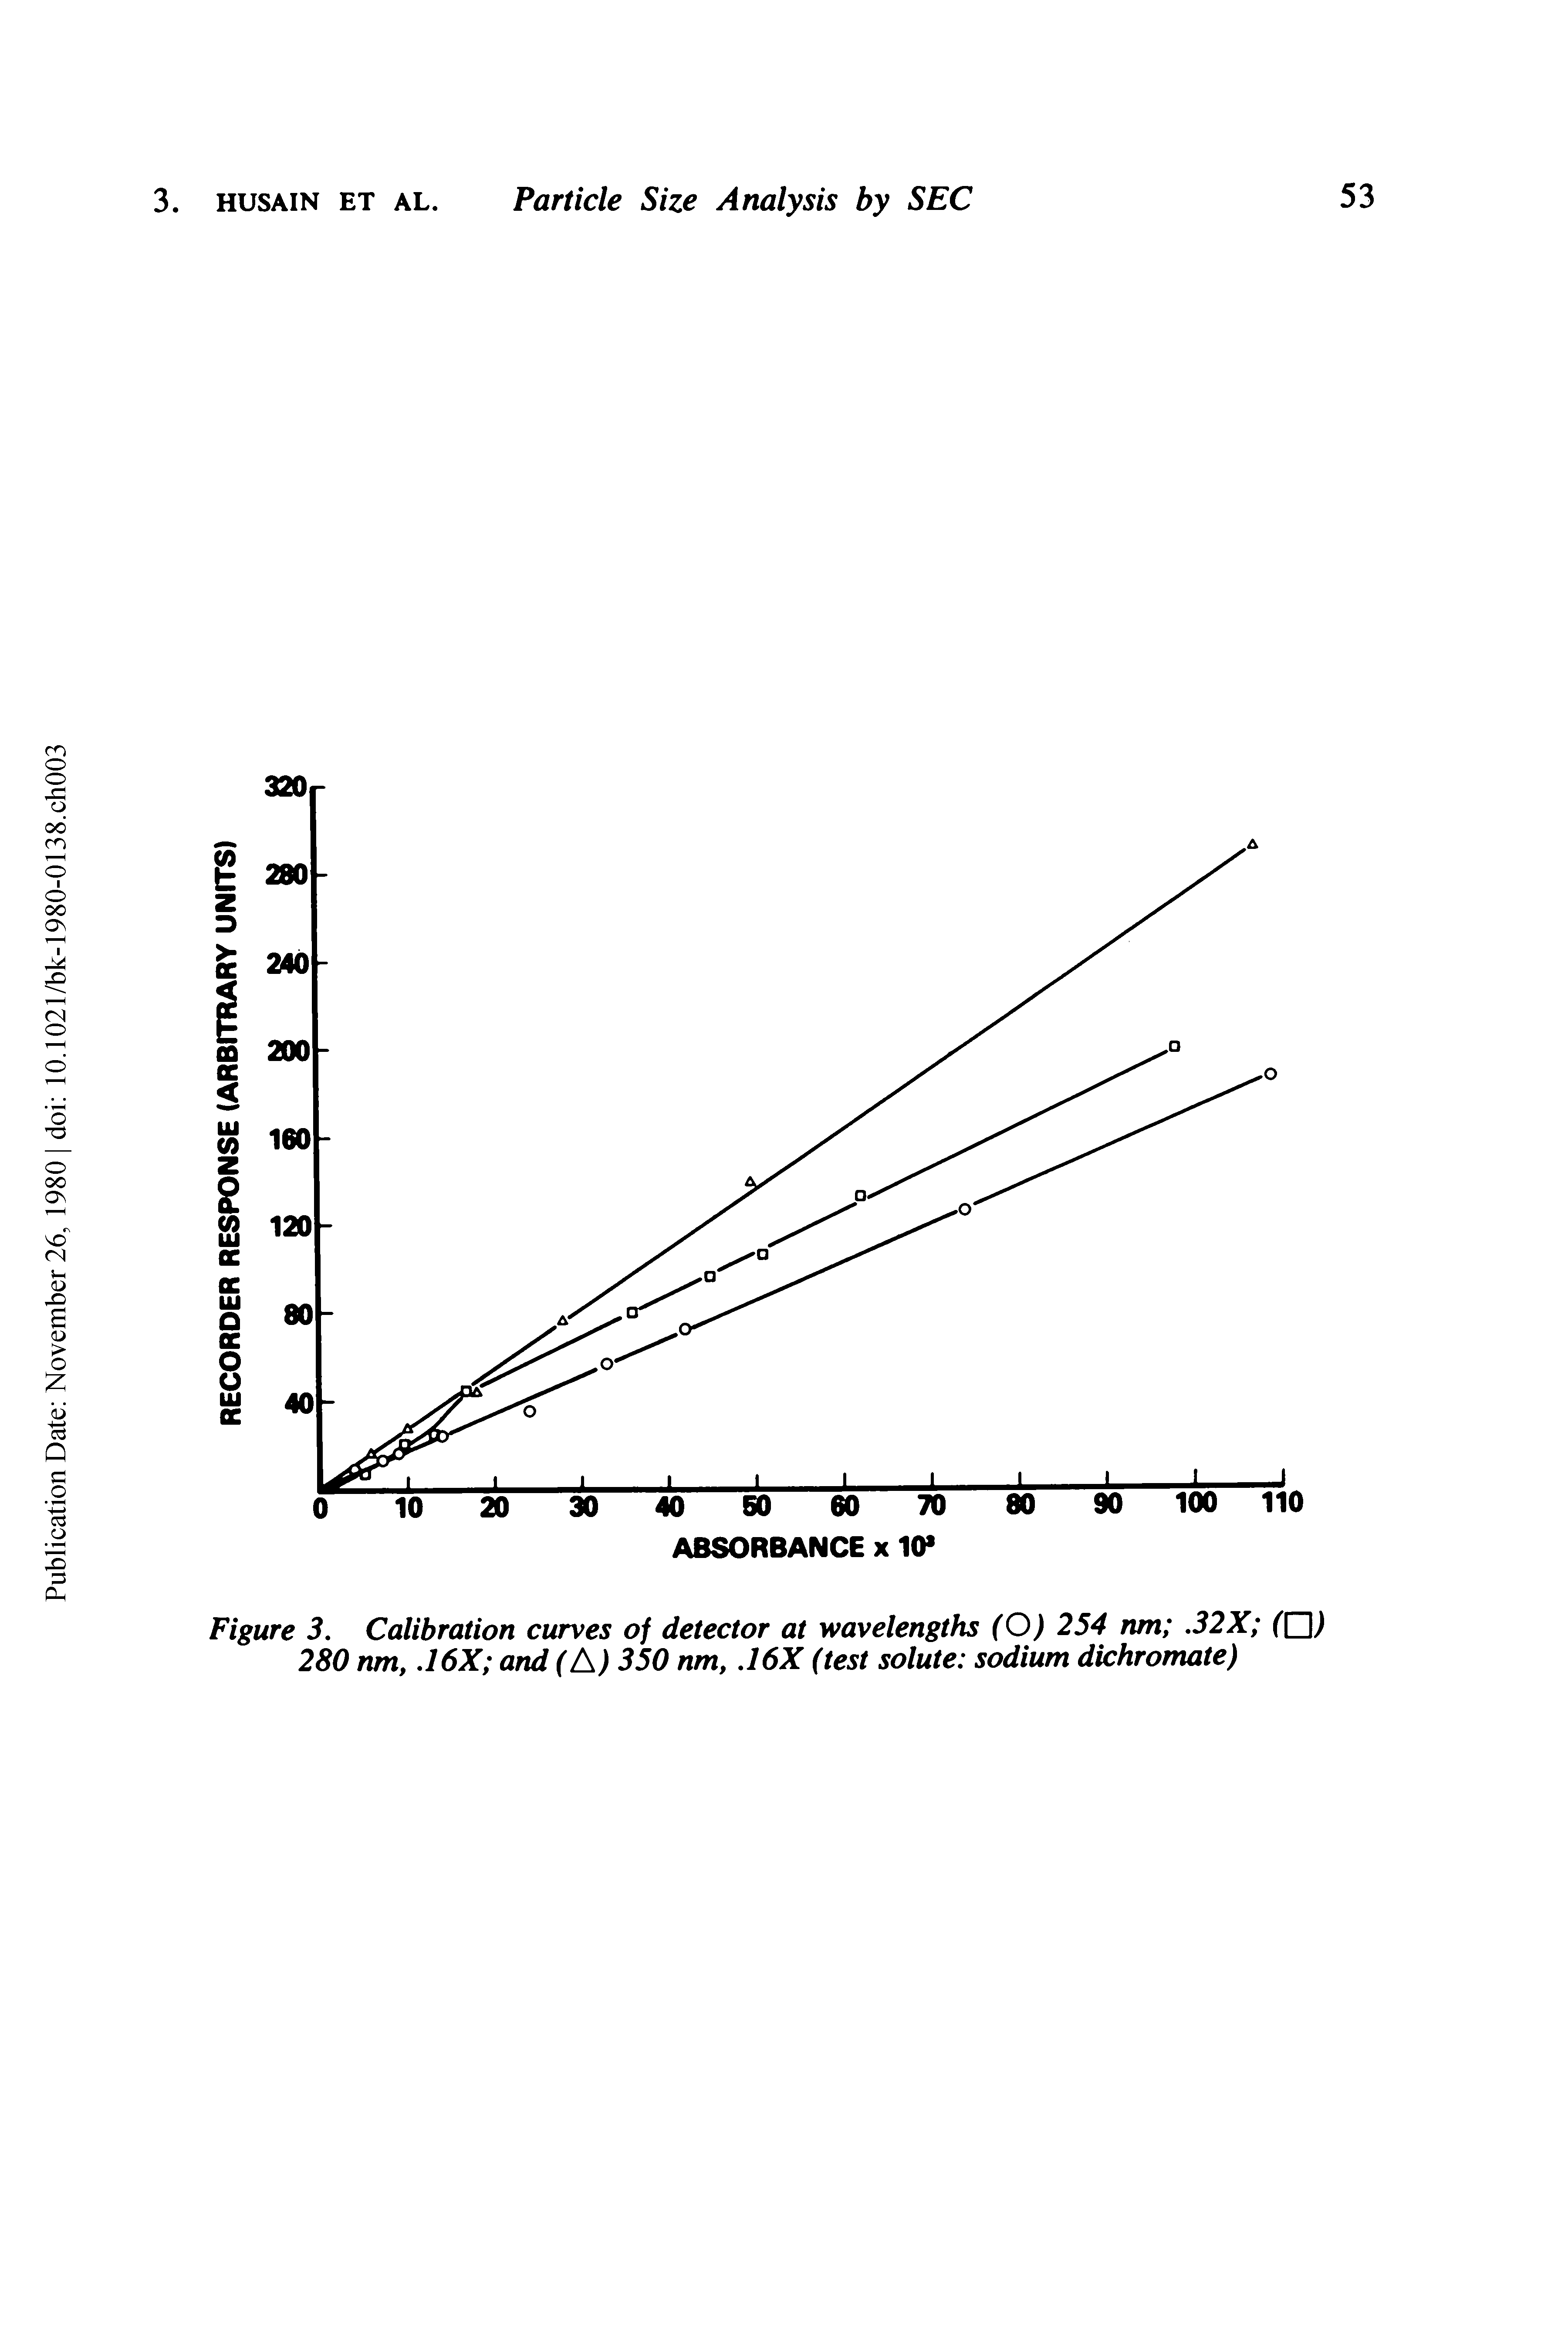 Figure 3. Calibration curves of detector at wavelengths (O) 254 run . 32X ([2) 280 run,. 16X and (l ) 350 nm,. 16X (test solute sodium dichromate)...